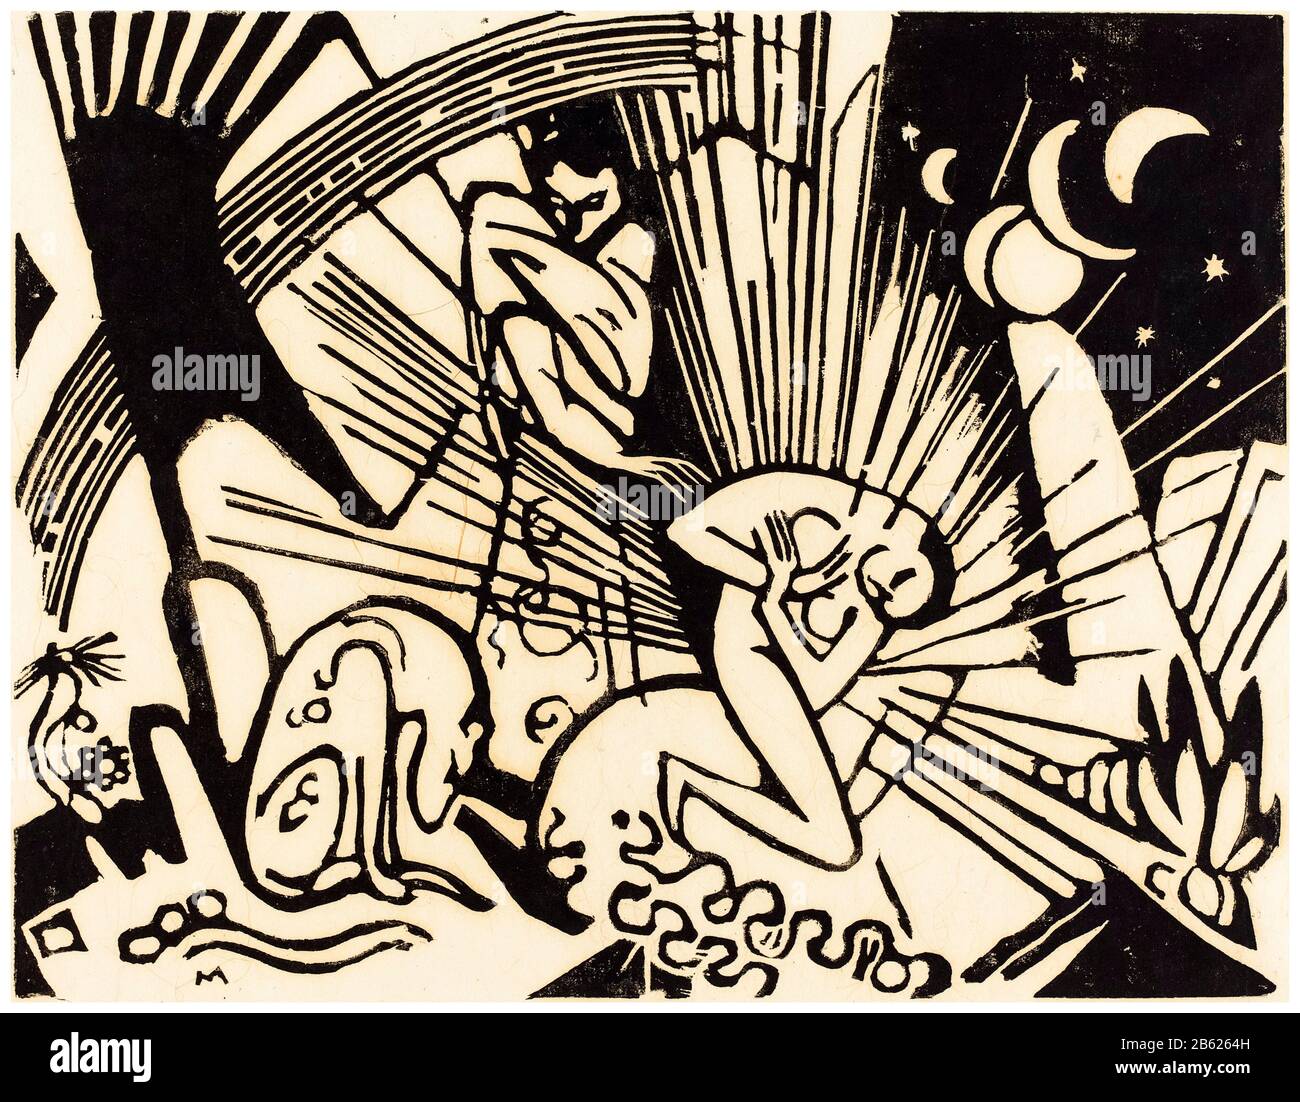 Reconciliation (Versoehnung) woodcut print by Franz Marc, 1912 Stock Photo